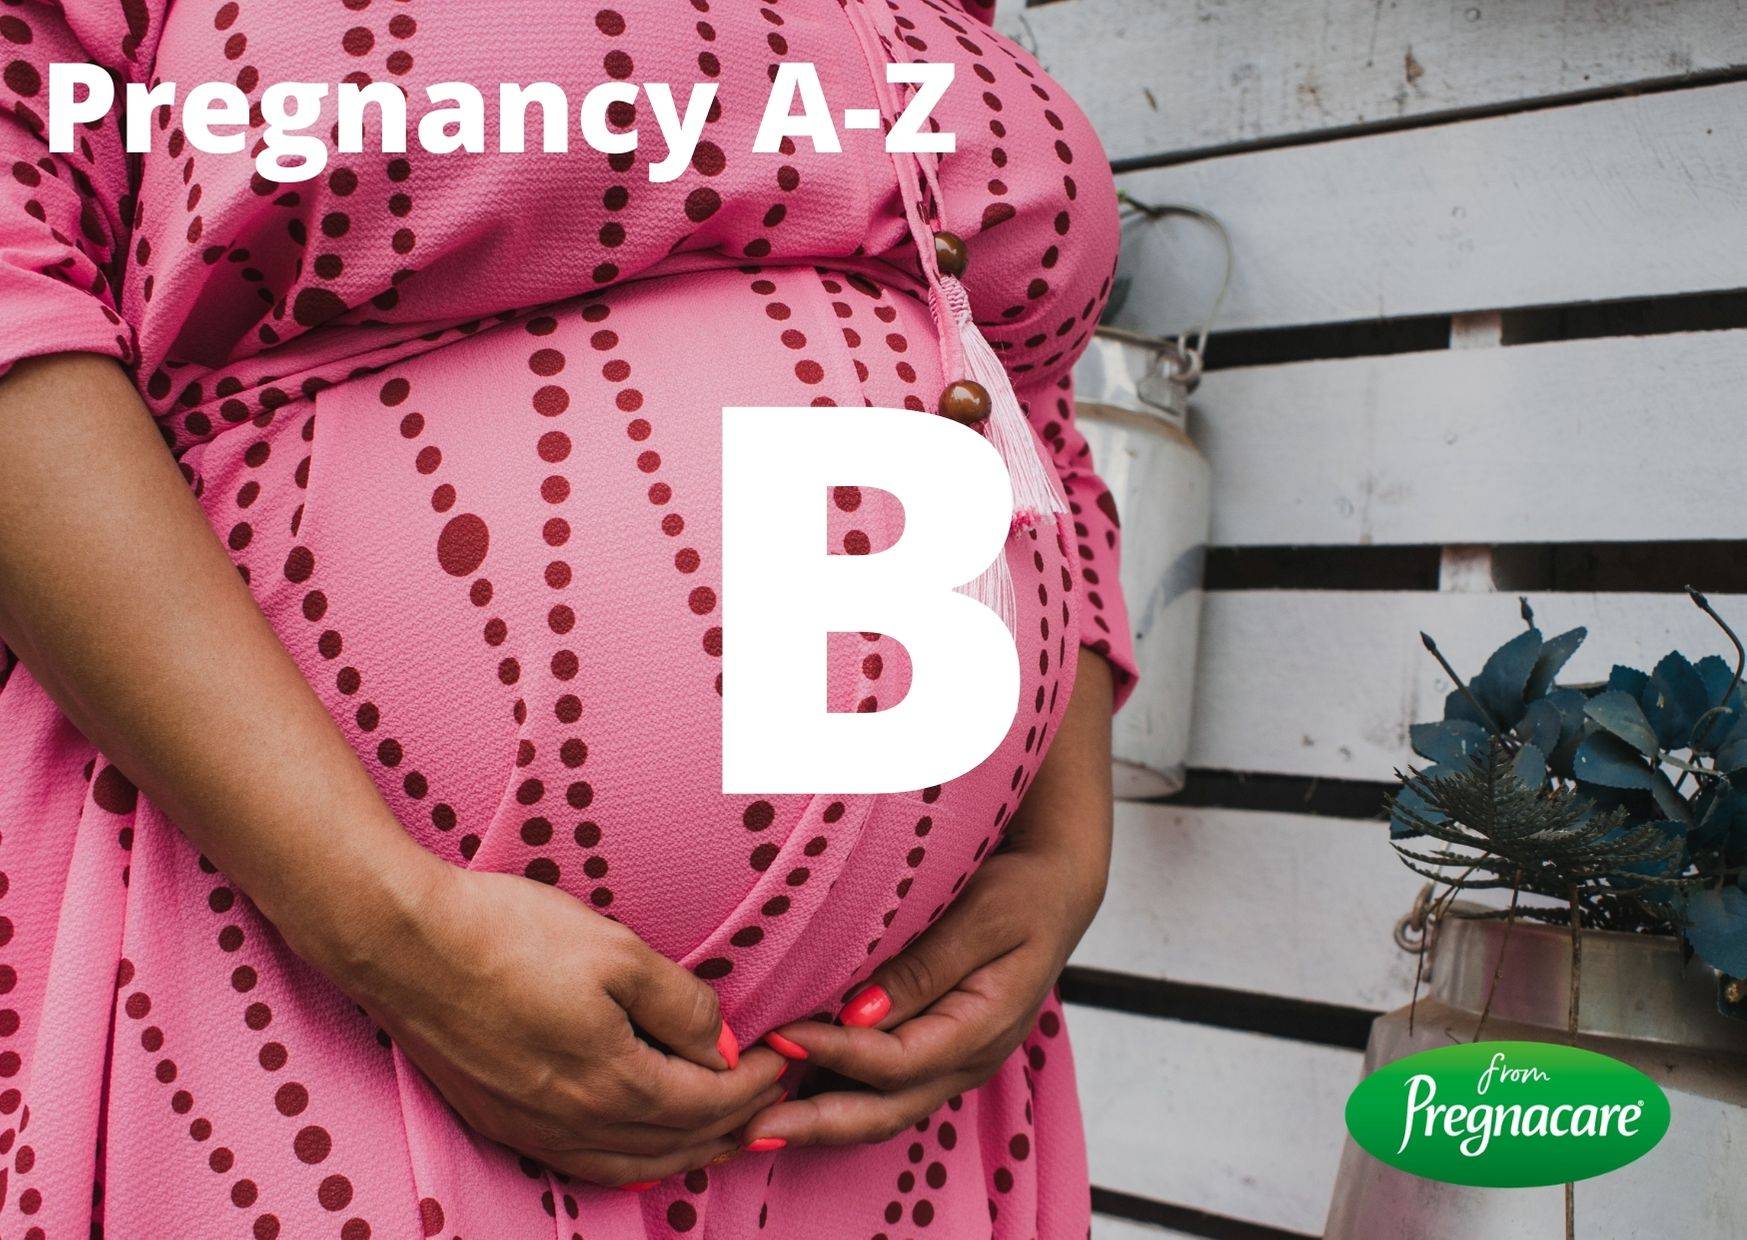 Pregnacare A-Z guide to pregnancy and nutrition - the letter B